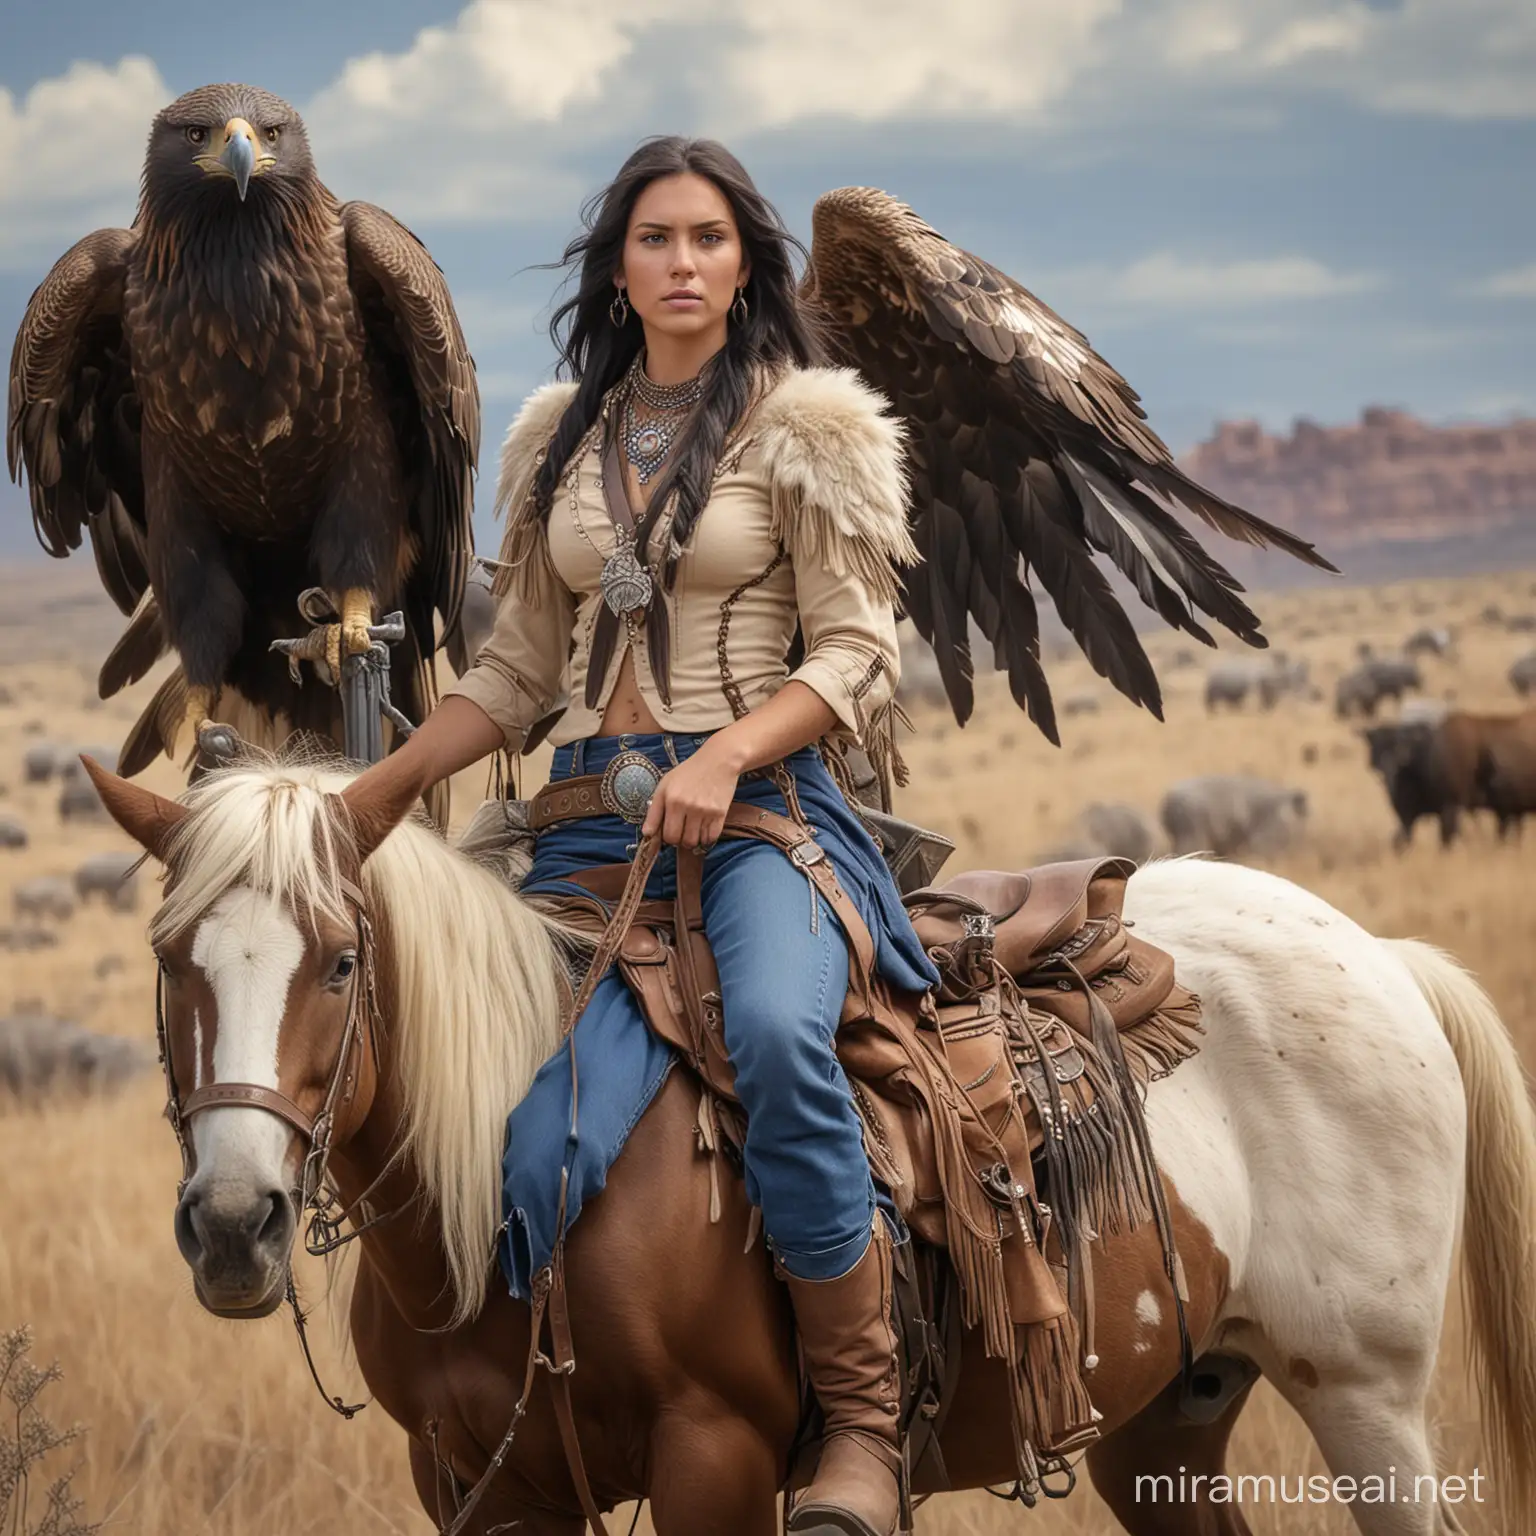 Majestic Apache Warrior and Cowgirl Amidst Buffalo Herd